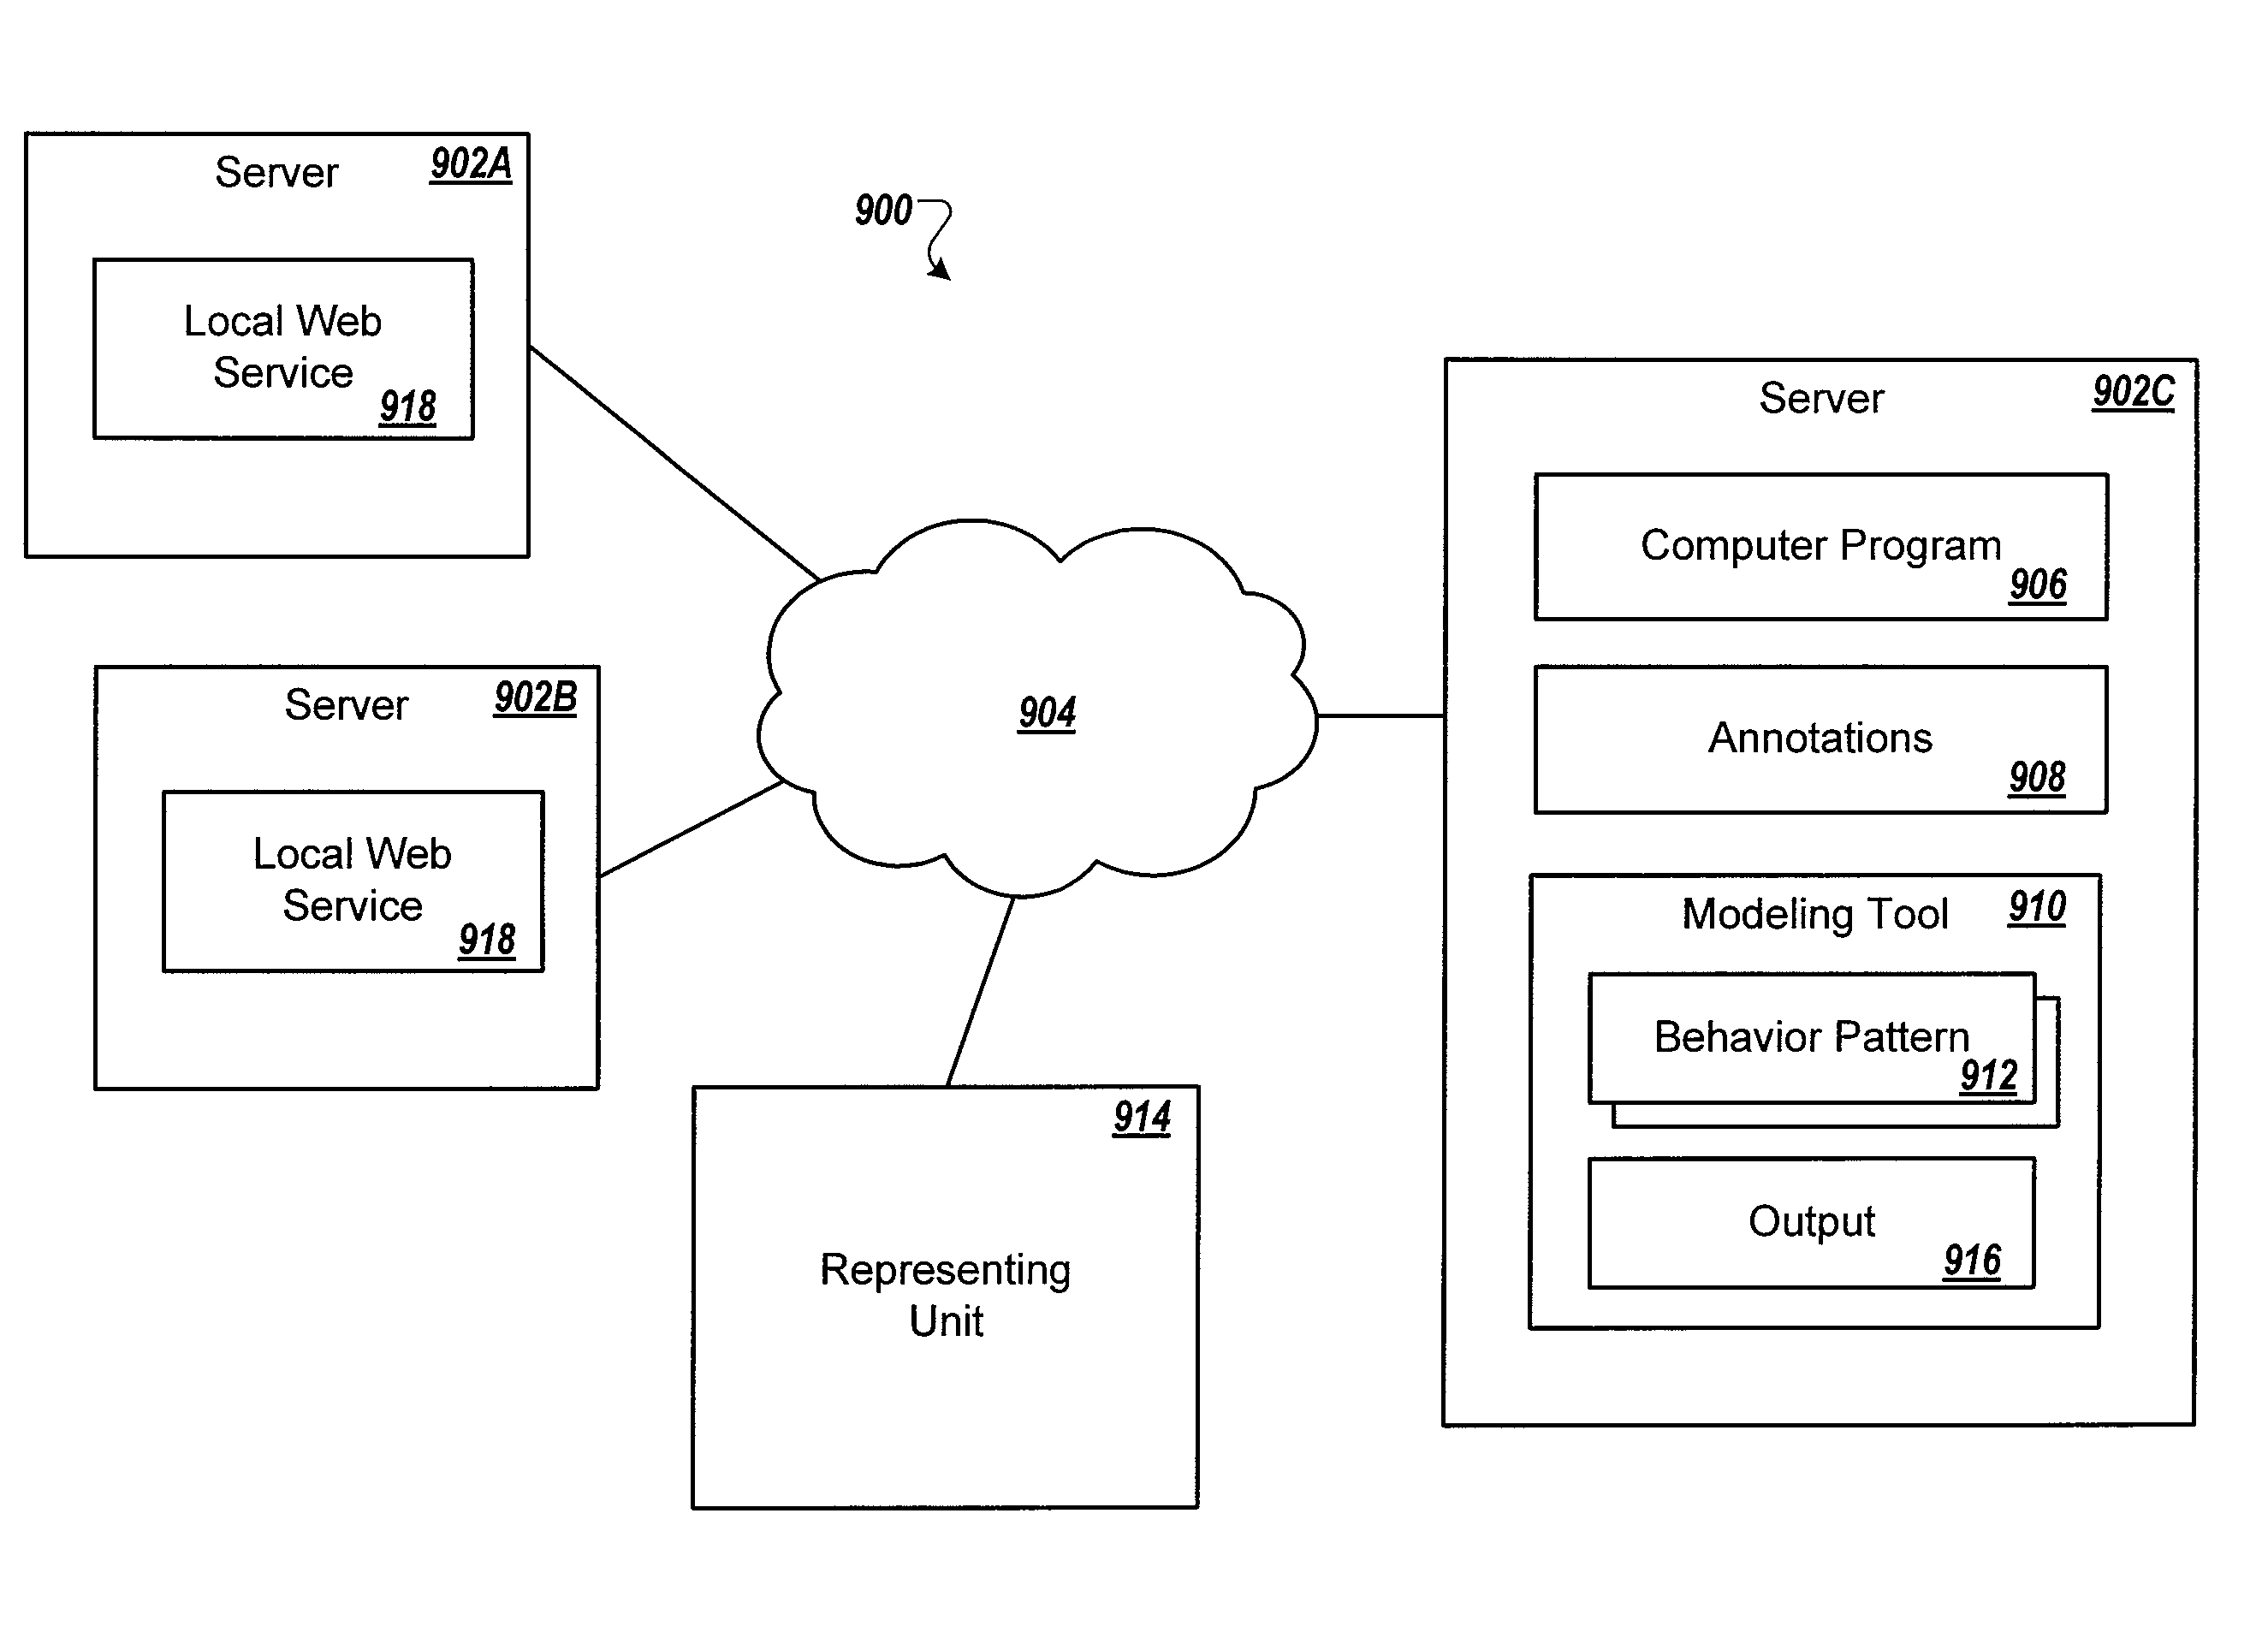 Method for automatically creating a behavior pattern of a computer program for model-based testing techniques